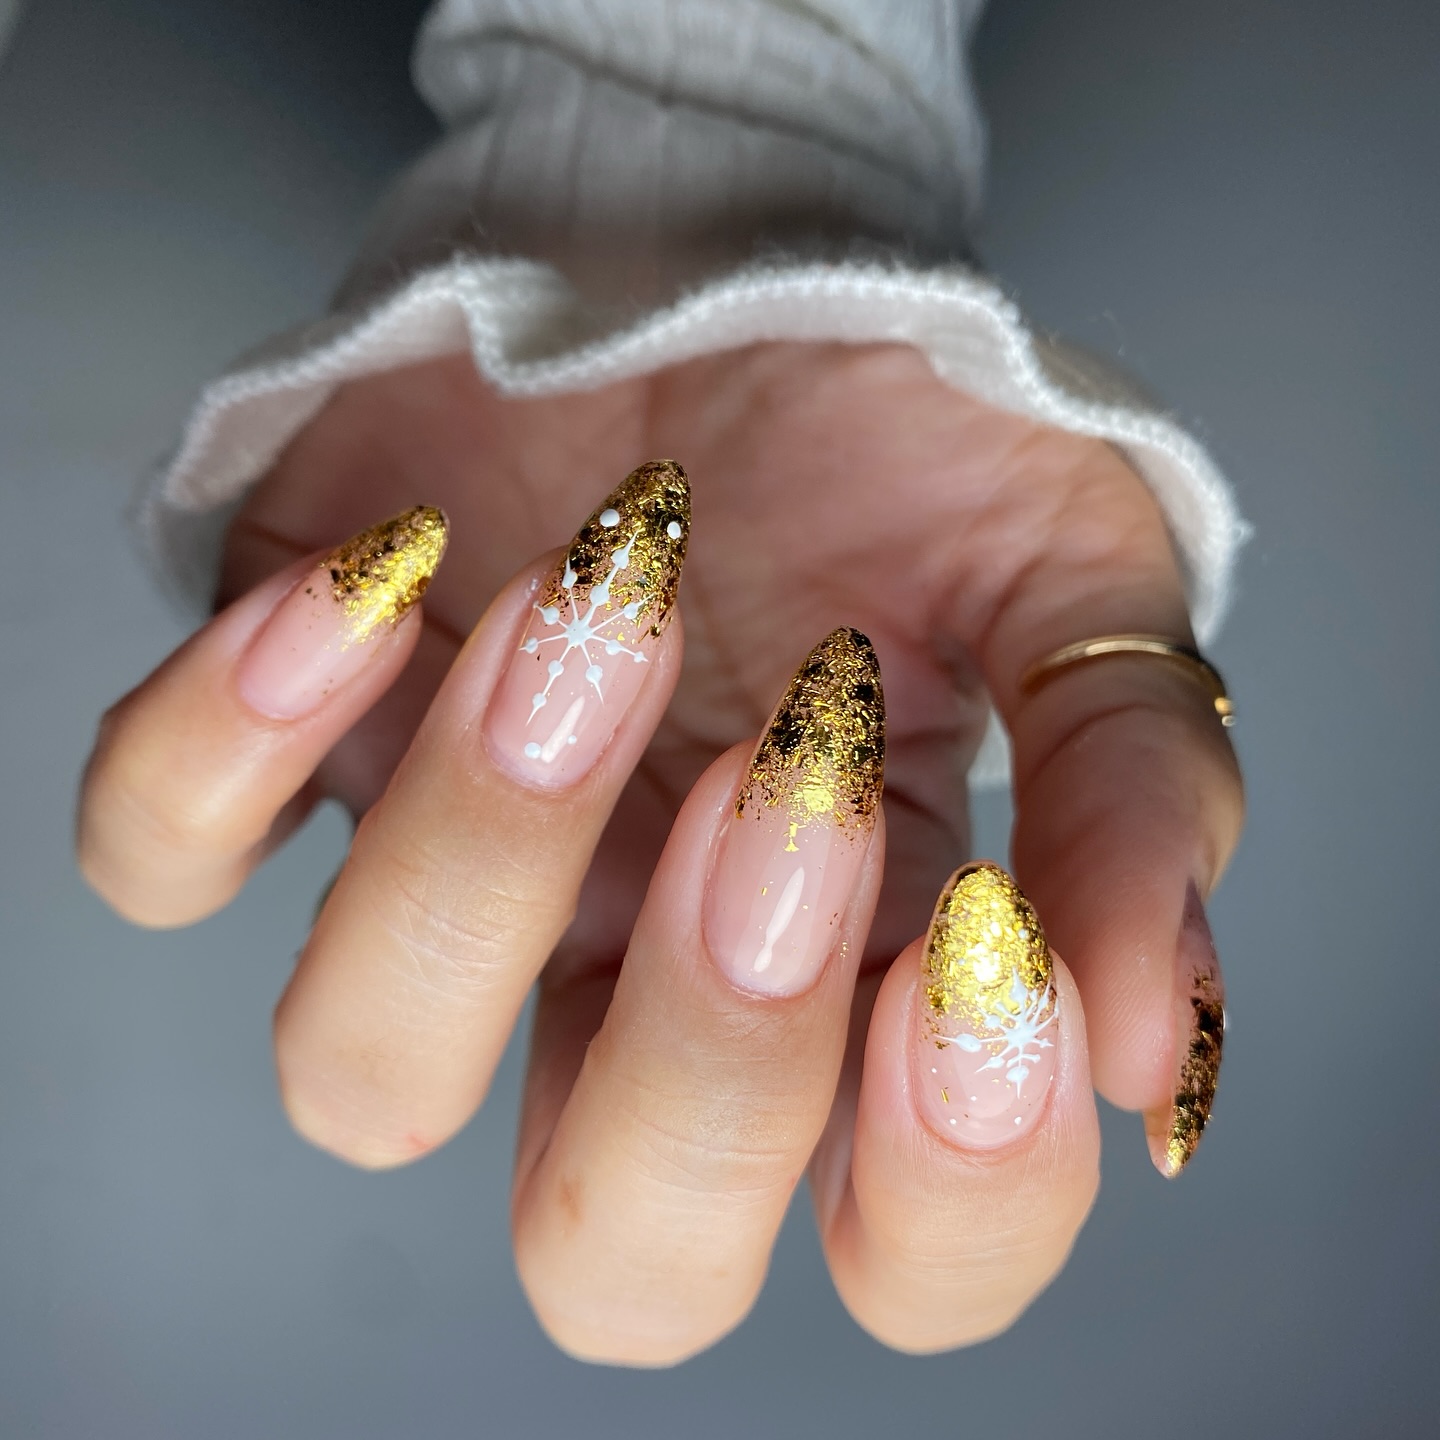 Trendy Nails & Spa 3 - Gold flakes or snowflakes